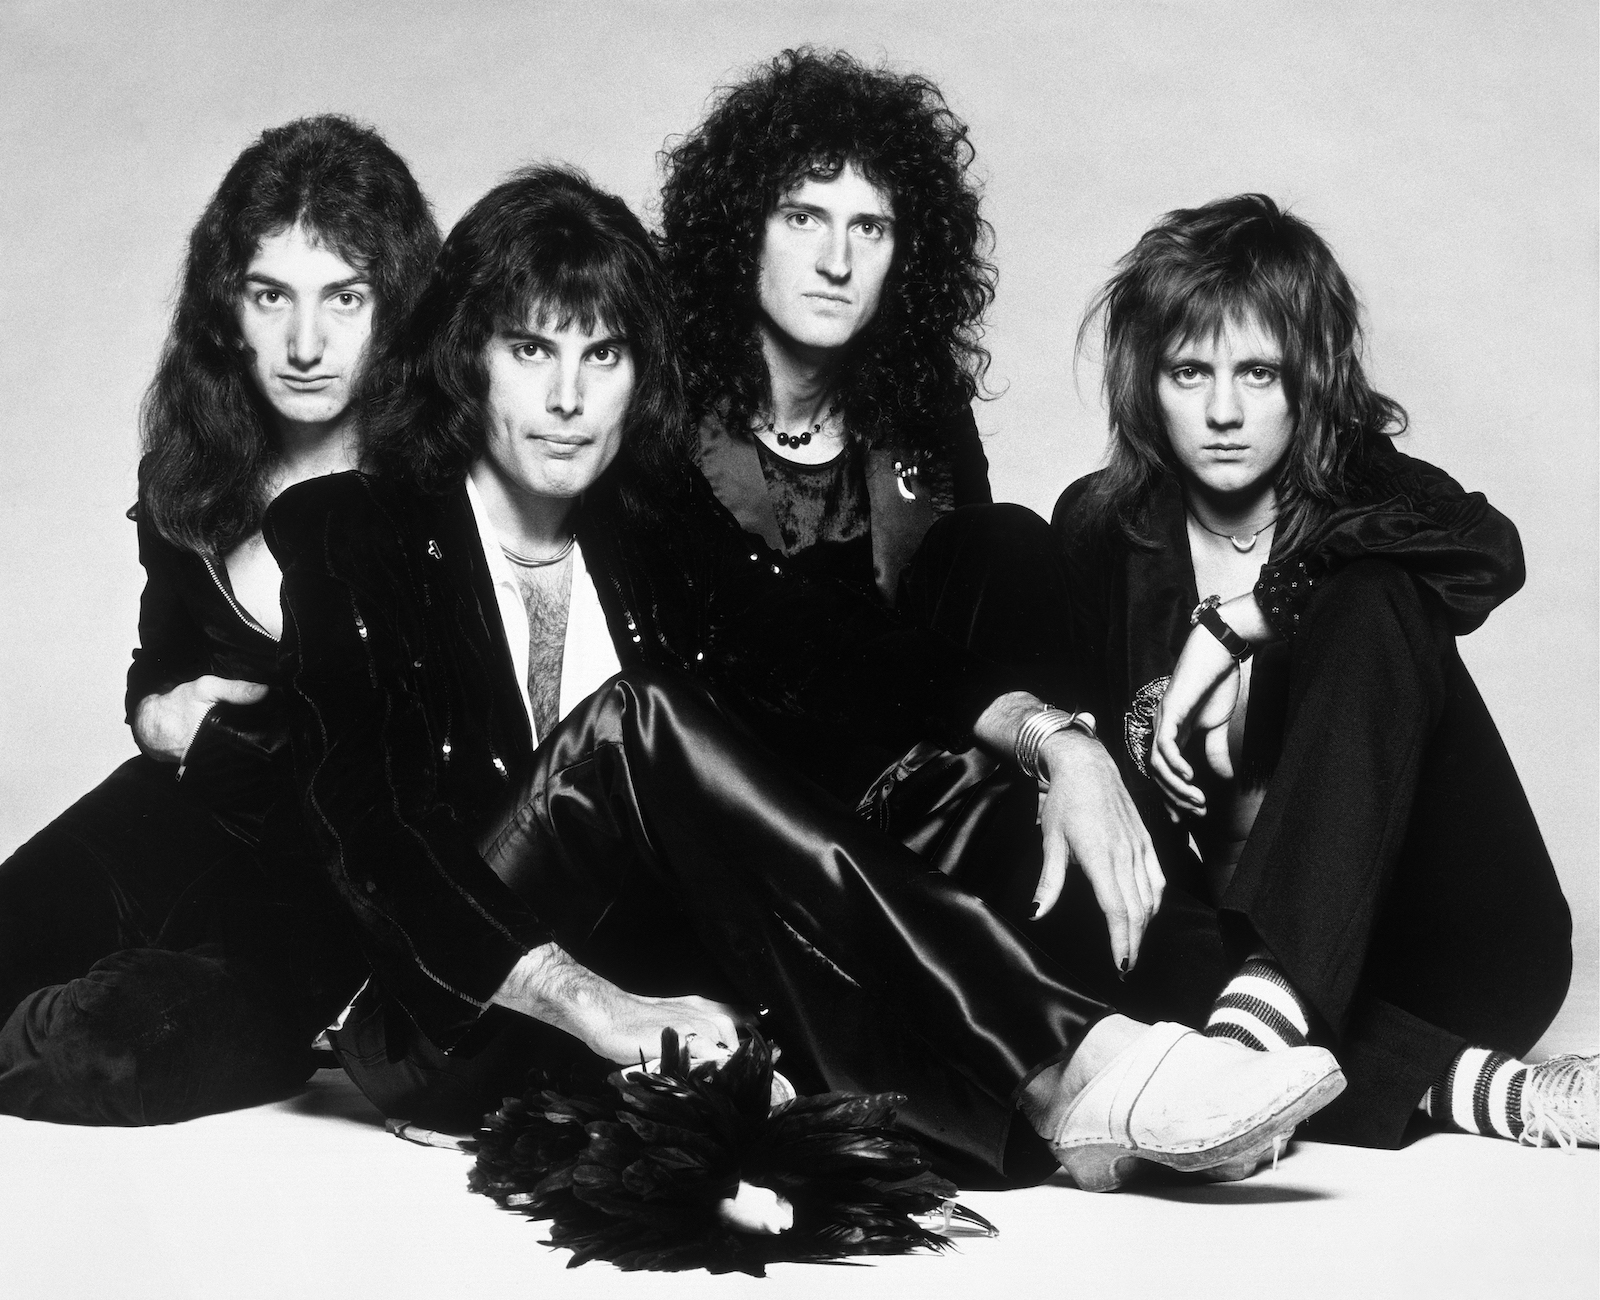 QUEEN'S ICONIC “BOHEMIAN RHAPSODY” BECOMES THE MOST-STREAMED SONG FROM THE  20TH CENTURY - UMG